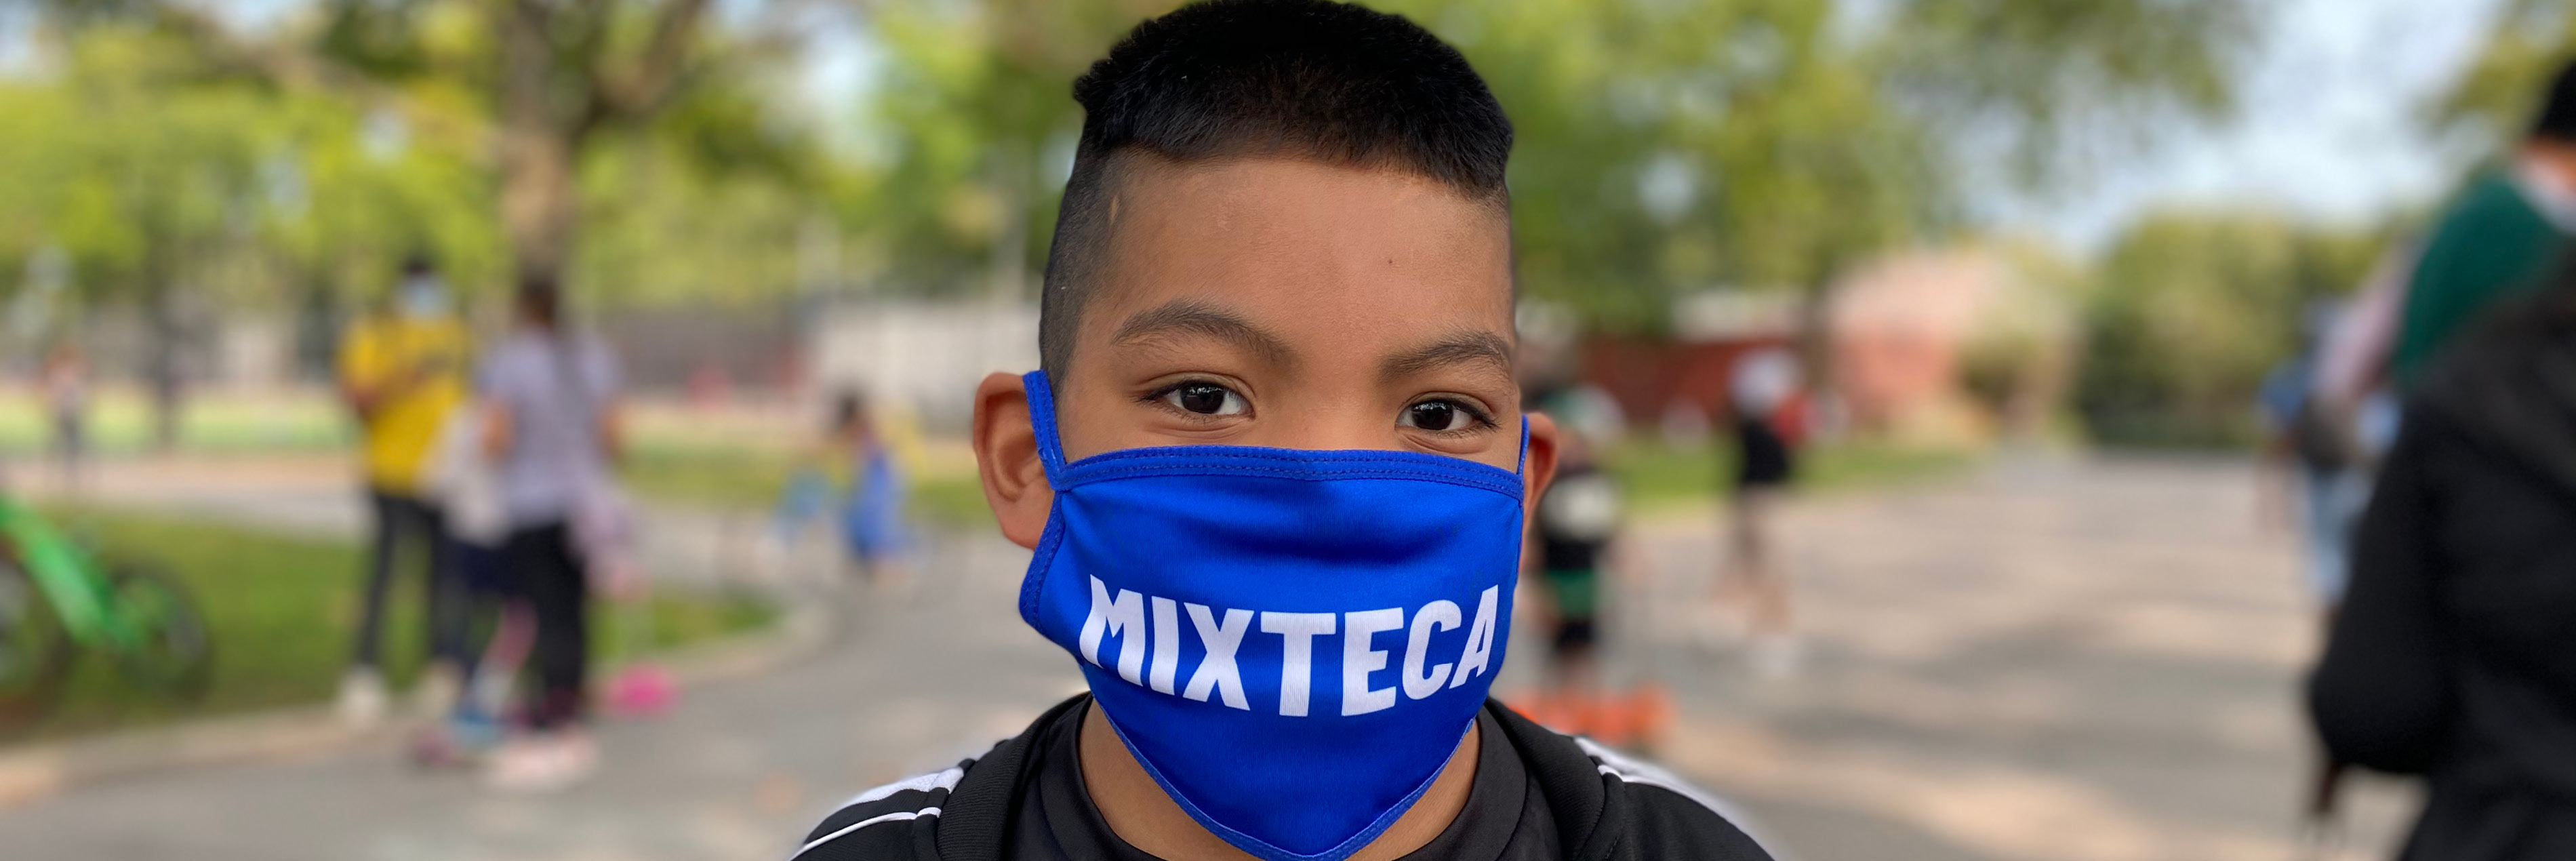 Boy with Mixteca facemask on